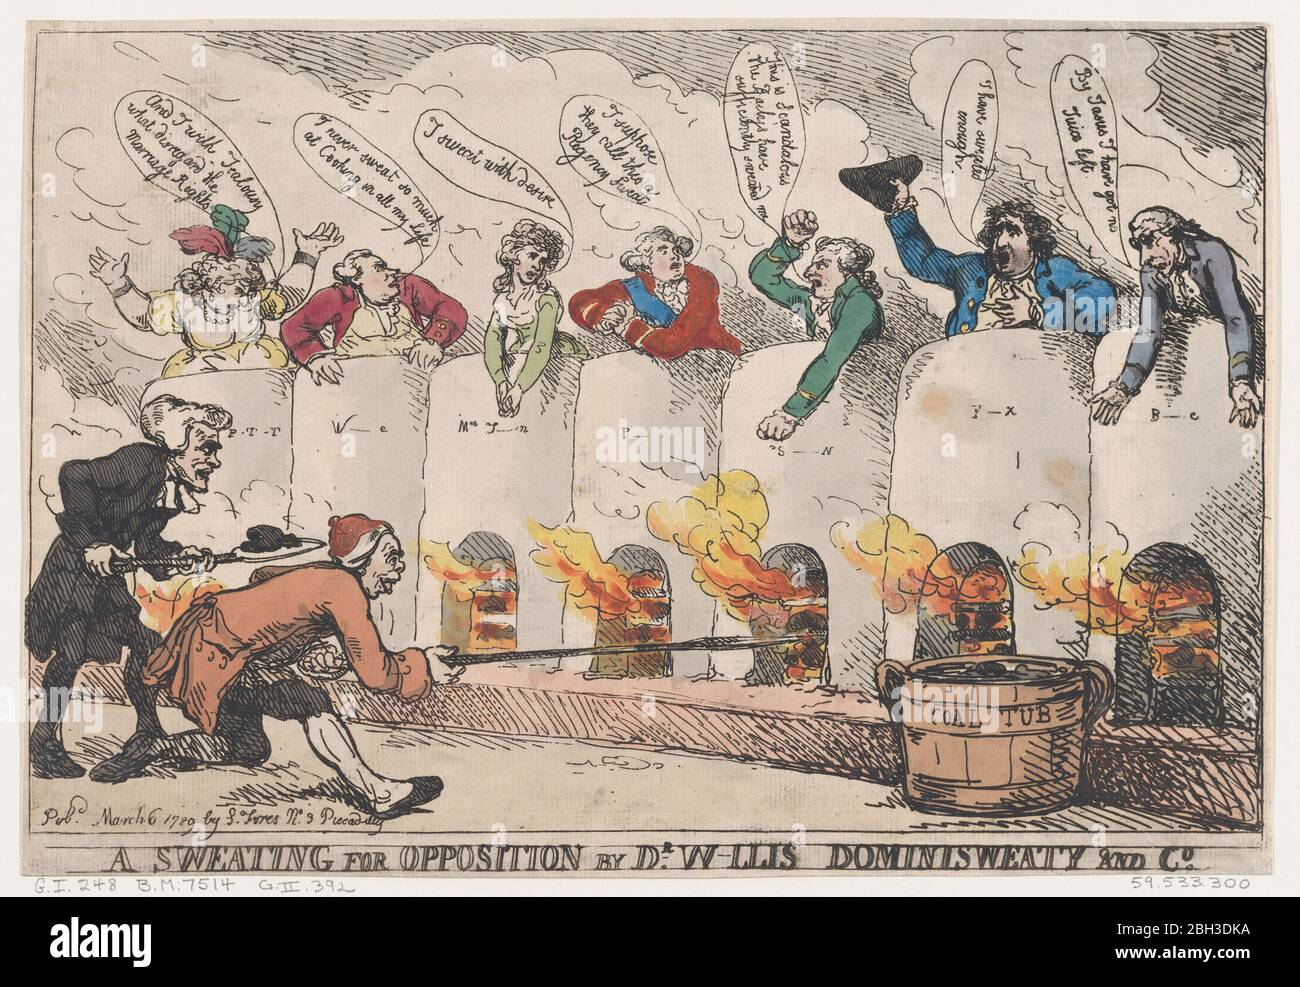 A Sweating for Opposition by Dr. W-llis Dominisweaty and Co. , March 6, 1789. Stock Photo